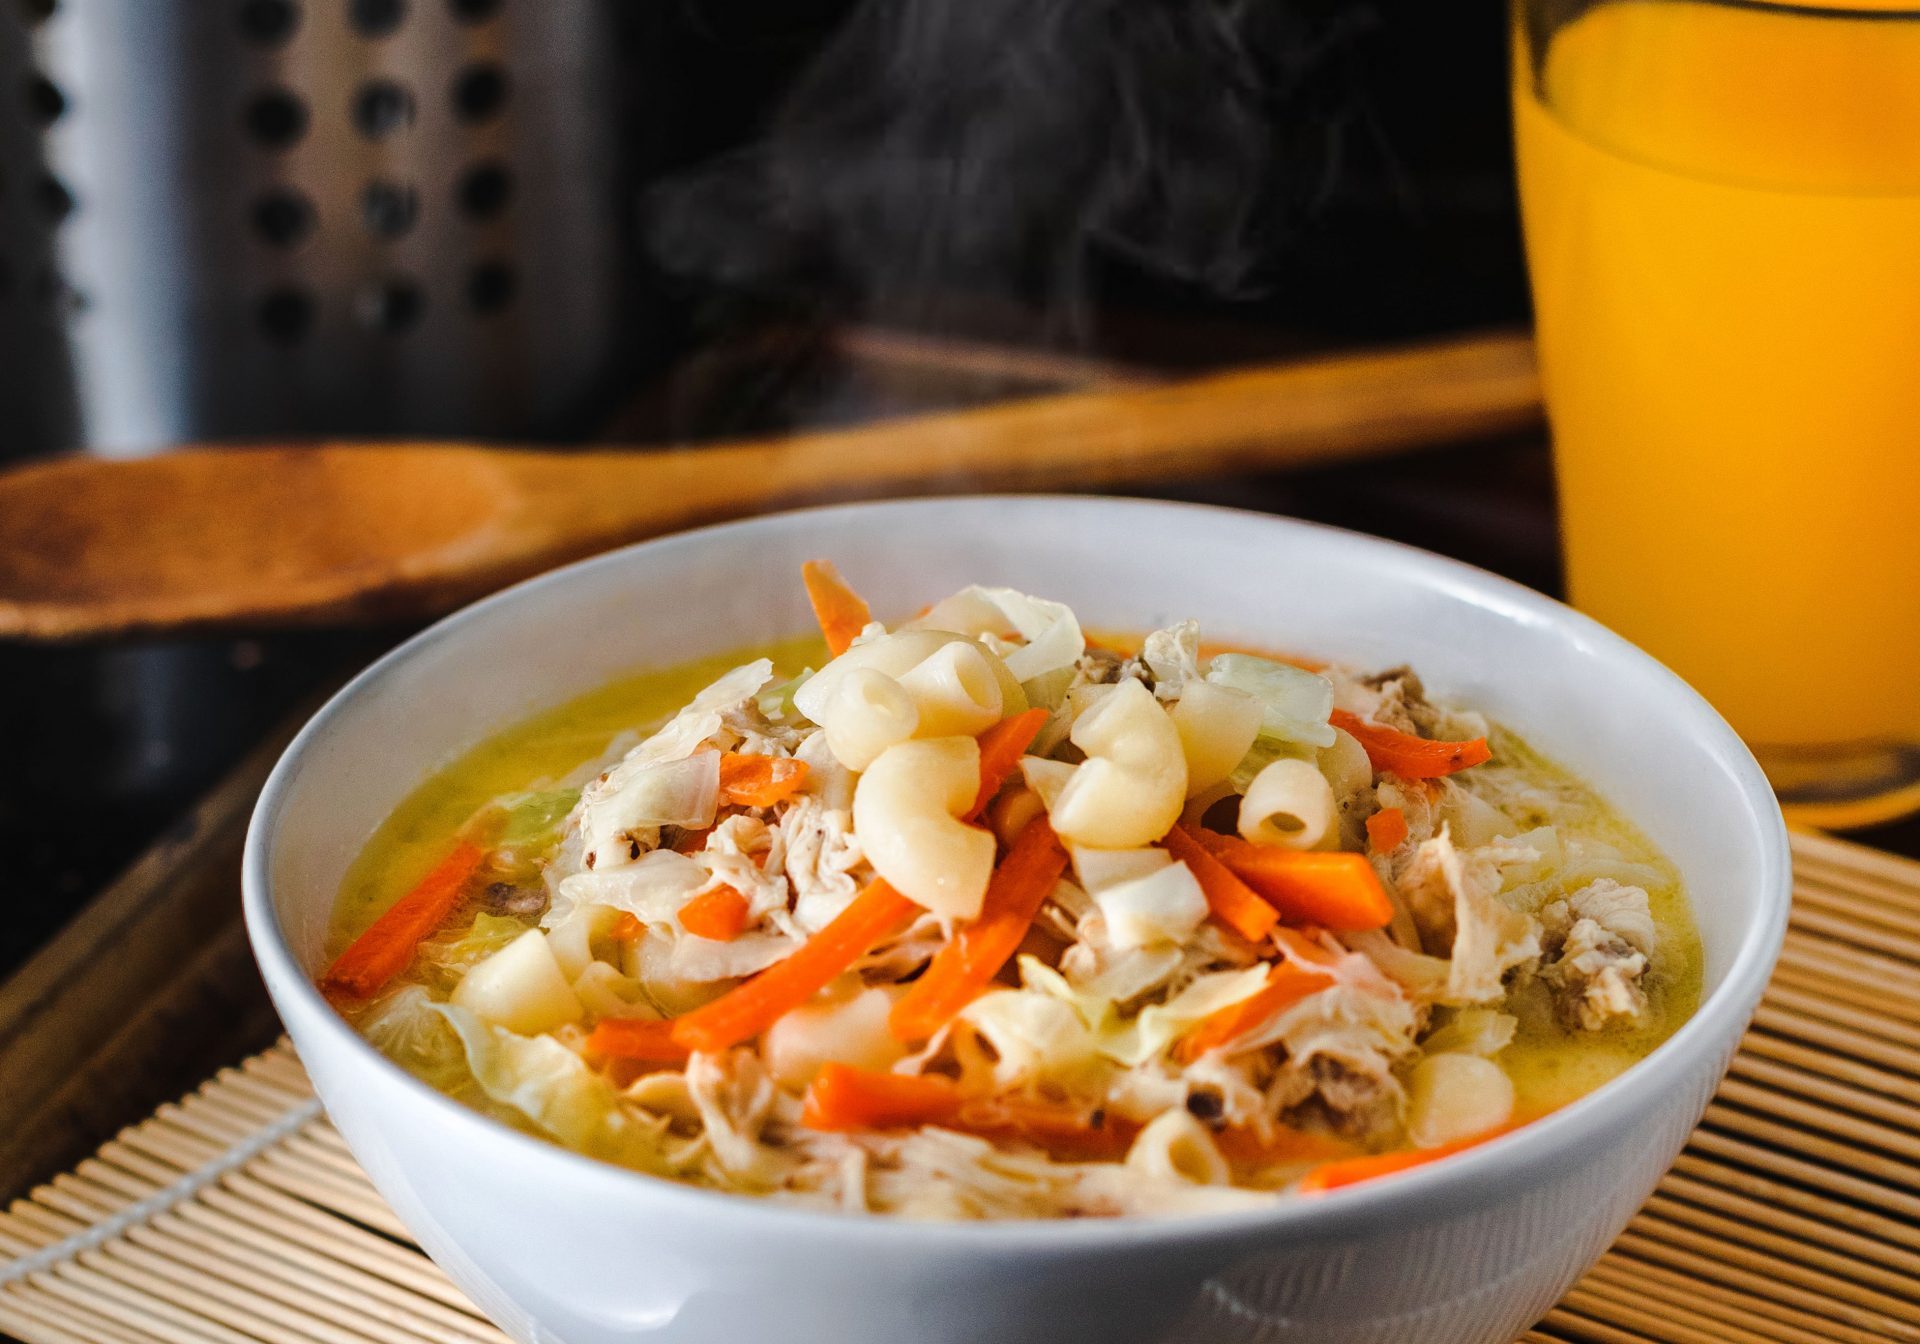 Soup with lots of vegetable and noodles on a table